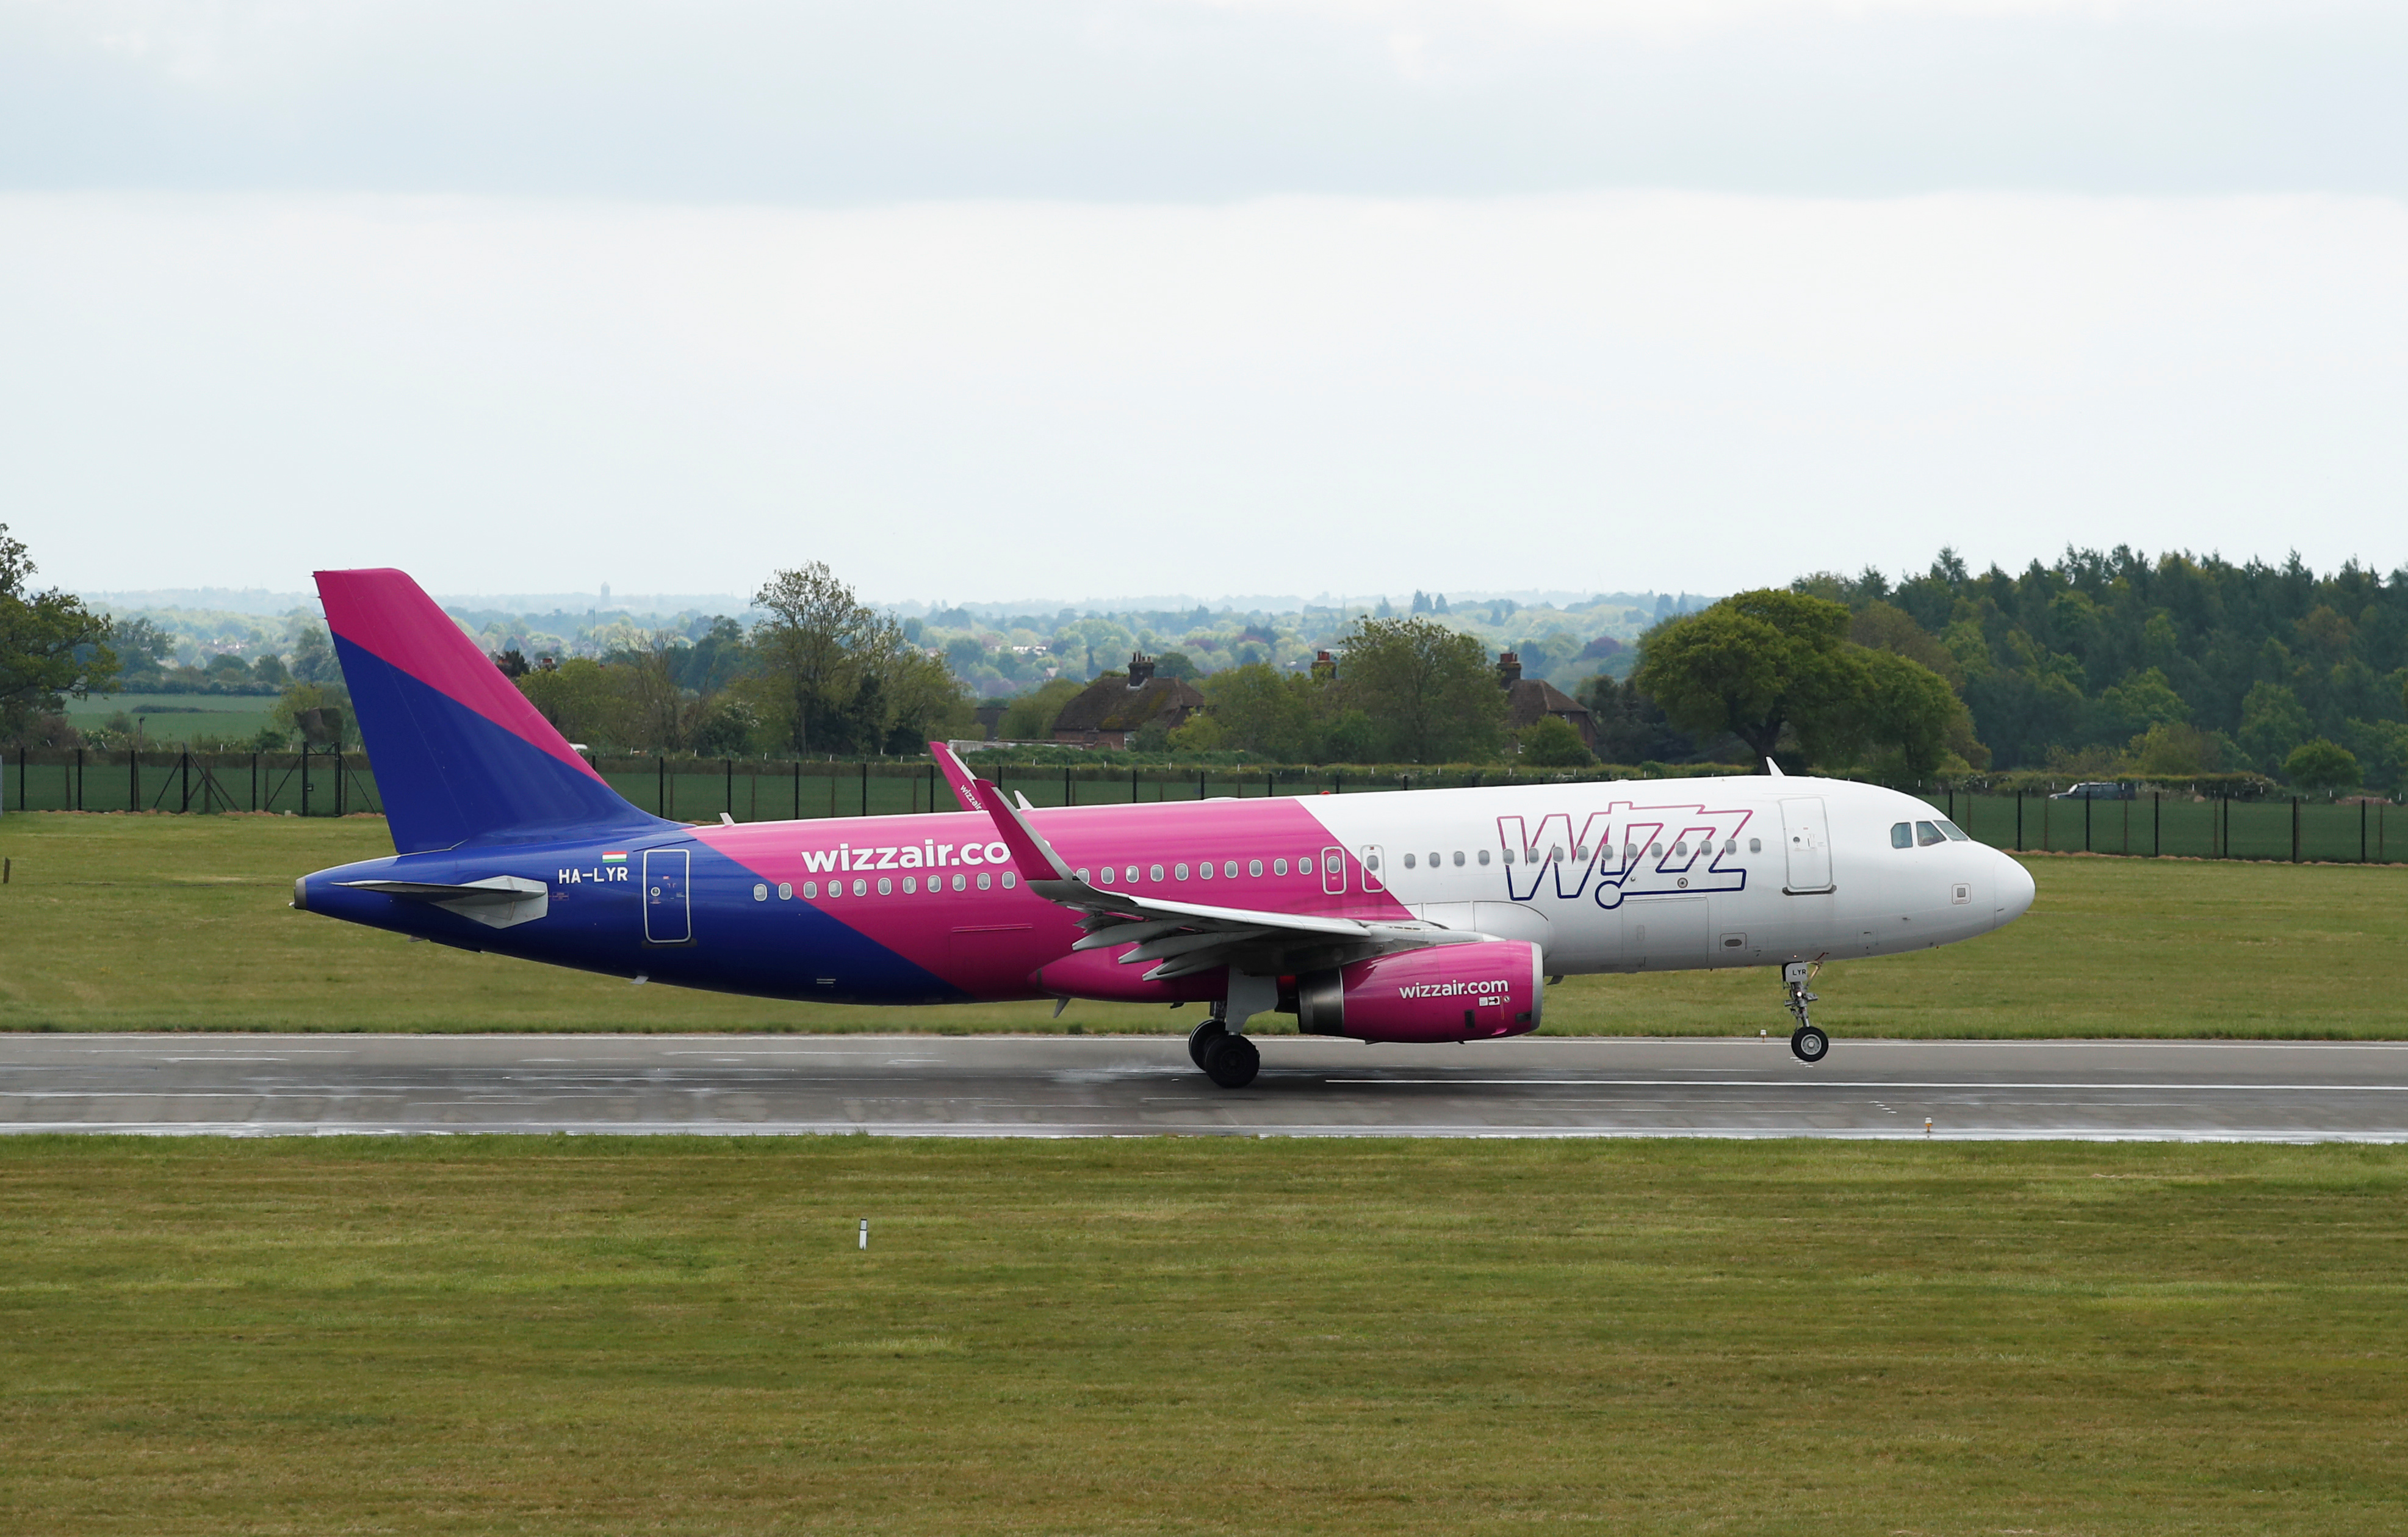 A Wizz Air Airbus A320 takes off from Luton Airport after Wizz Air resumed flights today on some routes, following the outbreak of the coronavirus disease (COVID-19), Luton, Britain, May 1, 2020. REUTERS/Andrew Boyers